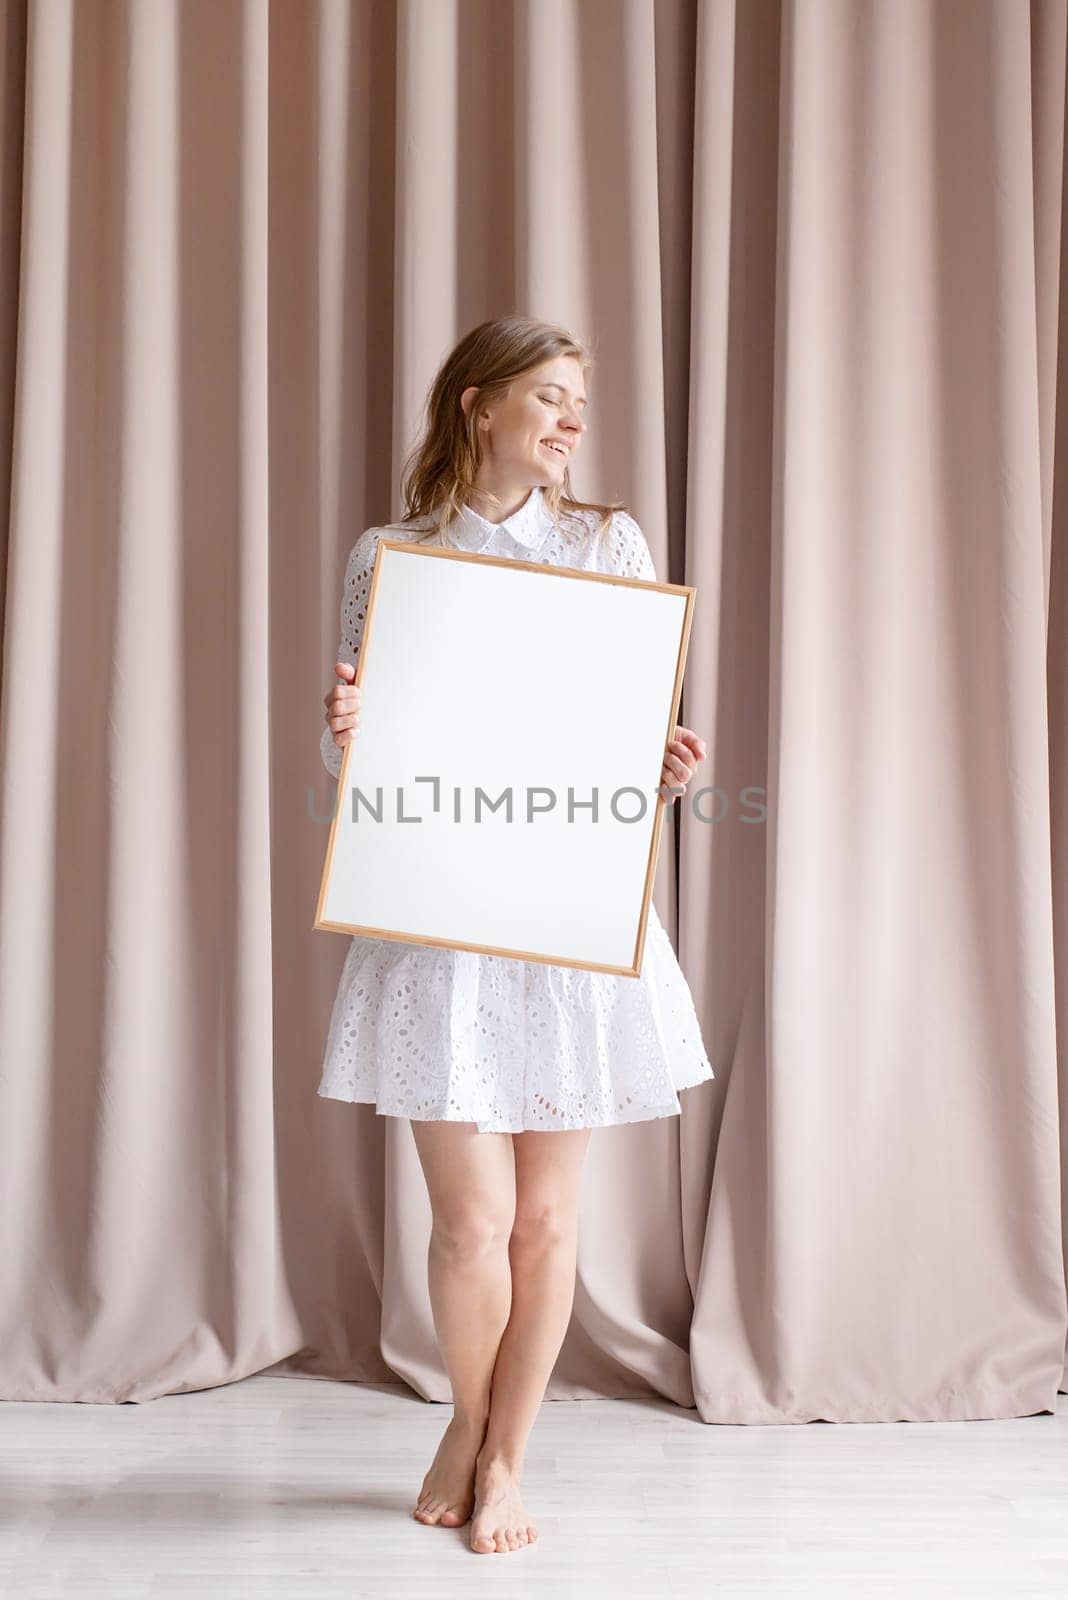 barefoot woman in beautiful white dress holding blank frame, beige curtain background, mockup design